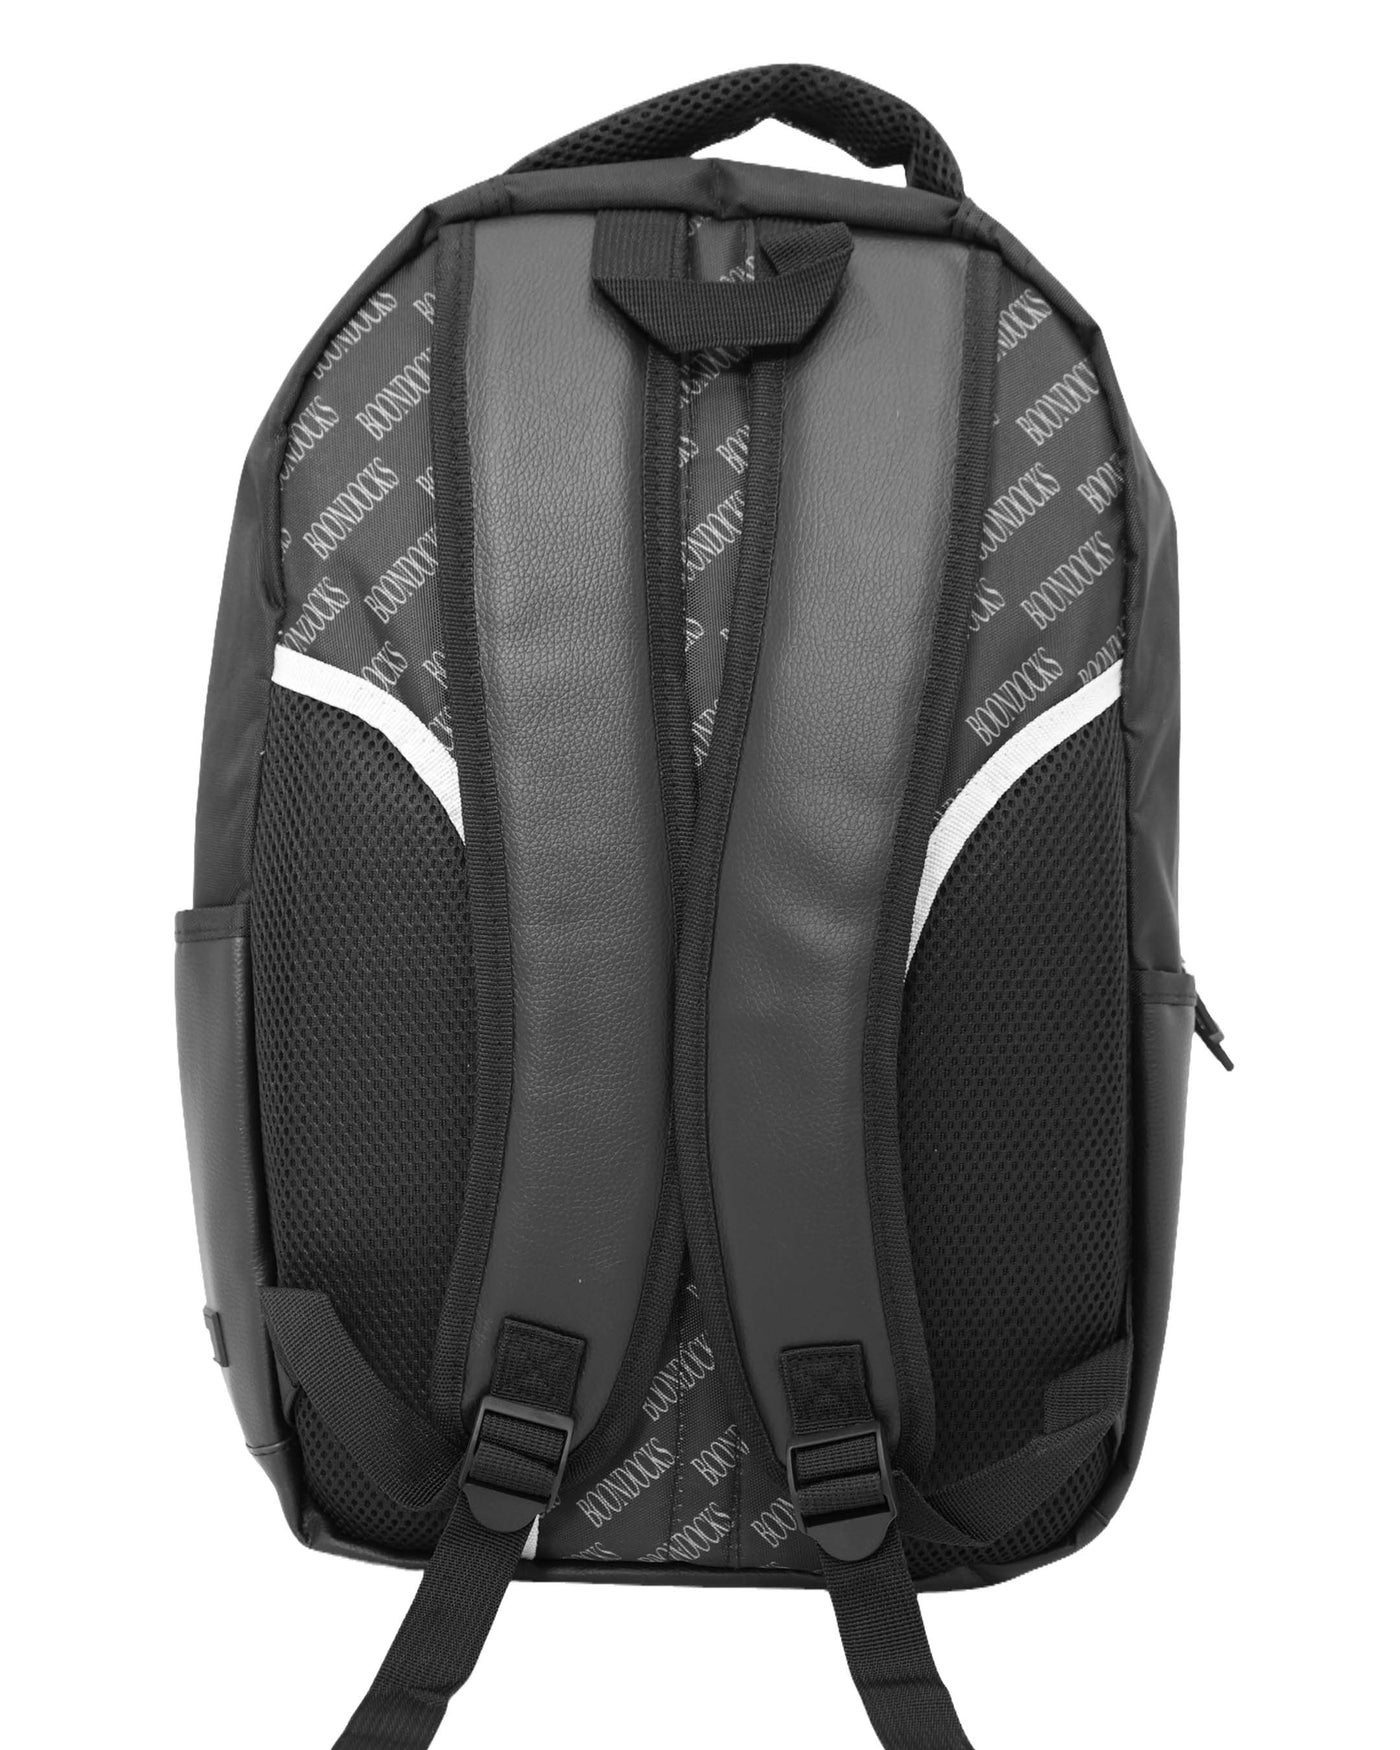 The Boondocks Reezy 100 Backpack